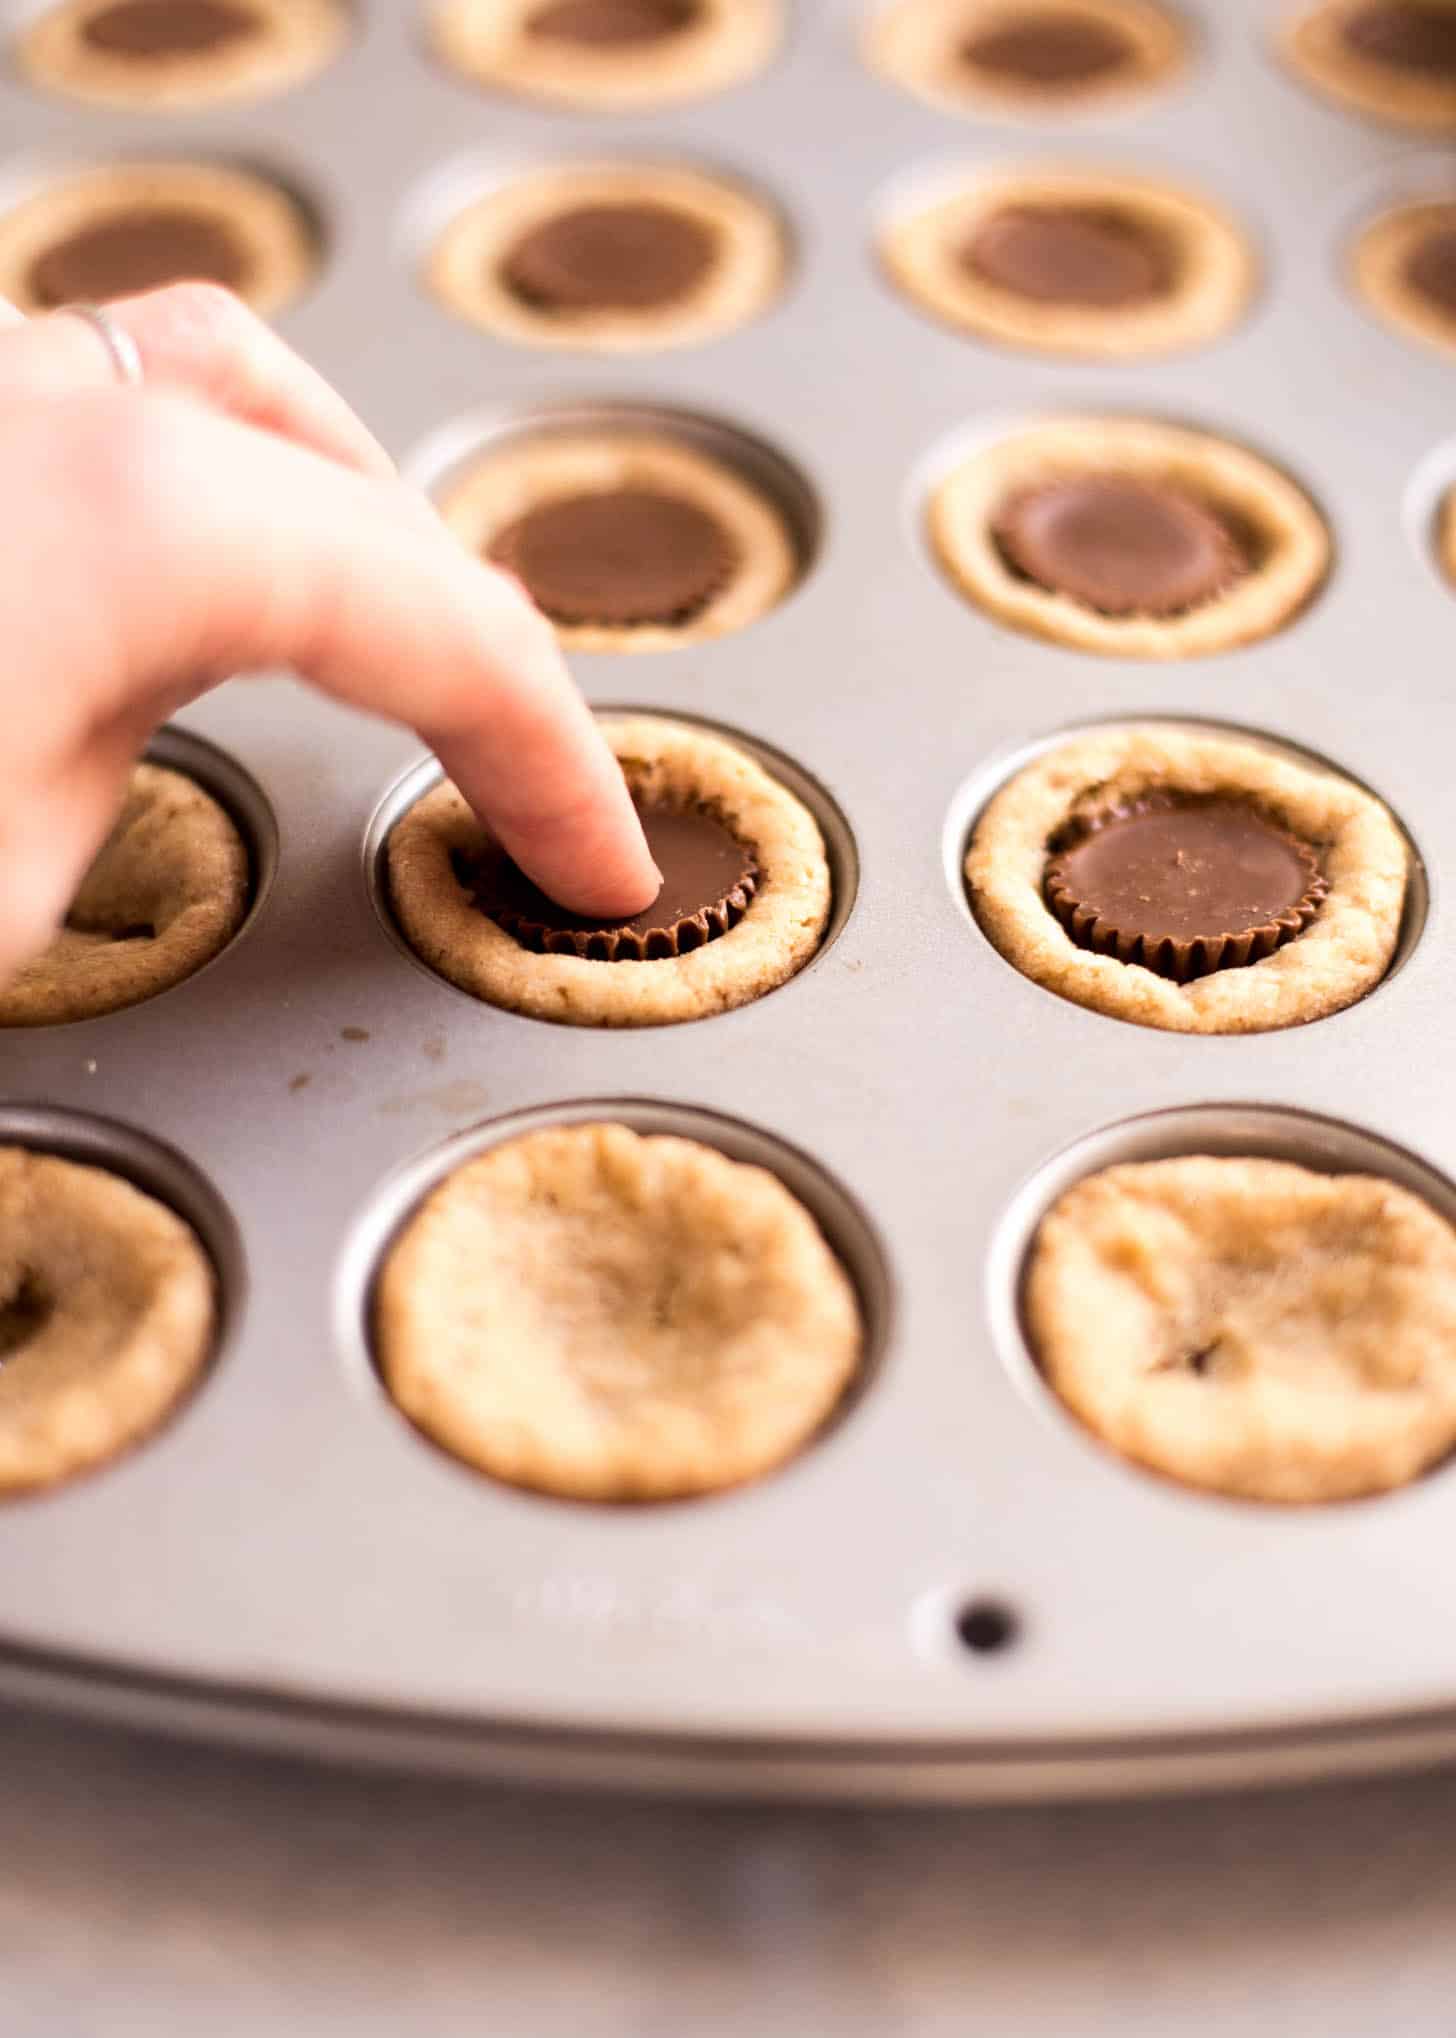 pressing a peanut butter cup into dough